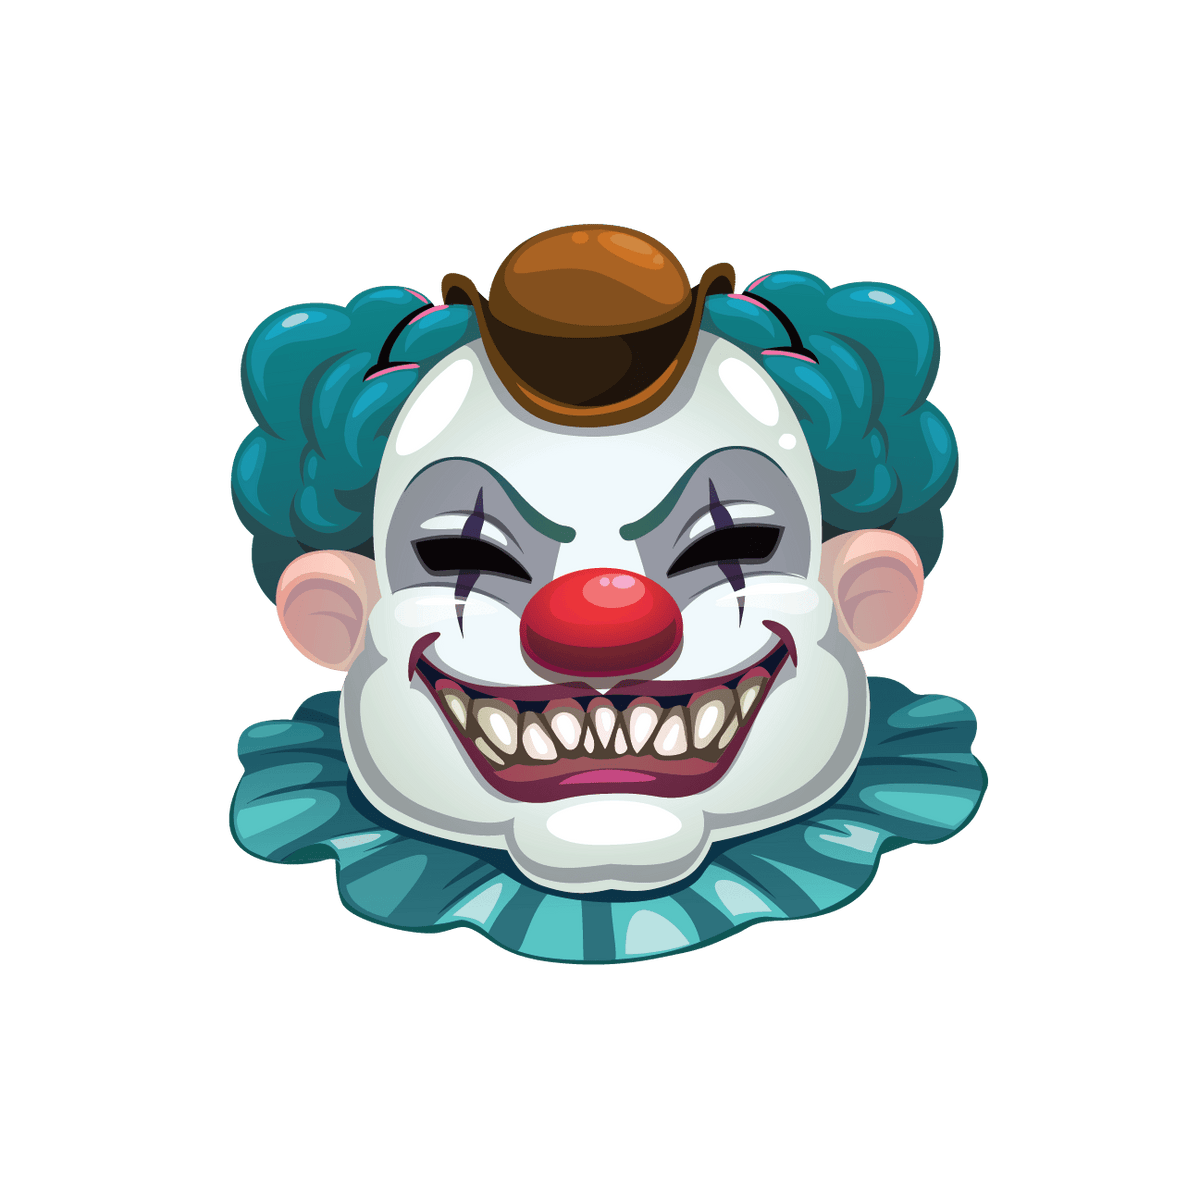 Illustration of a Cover-Alls Scary Clowns face with blue hair, a red nose, wearing a small brown hat, and a ruffled collar, set against a green background.